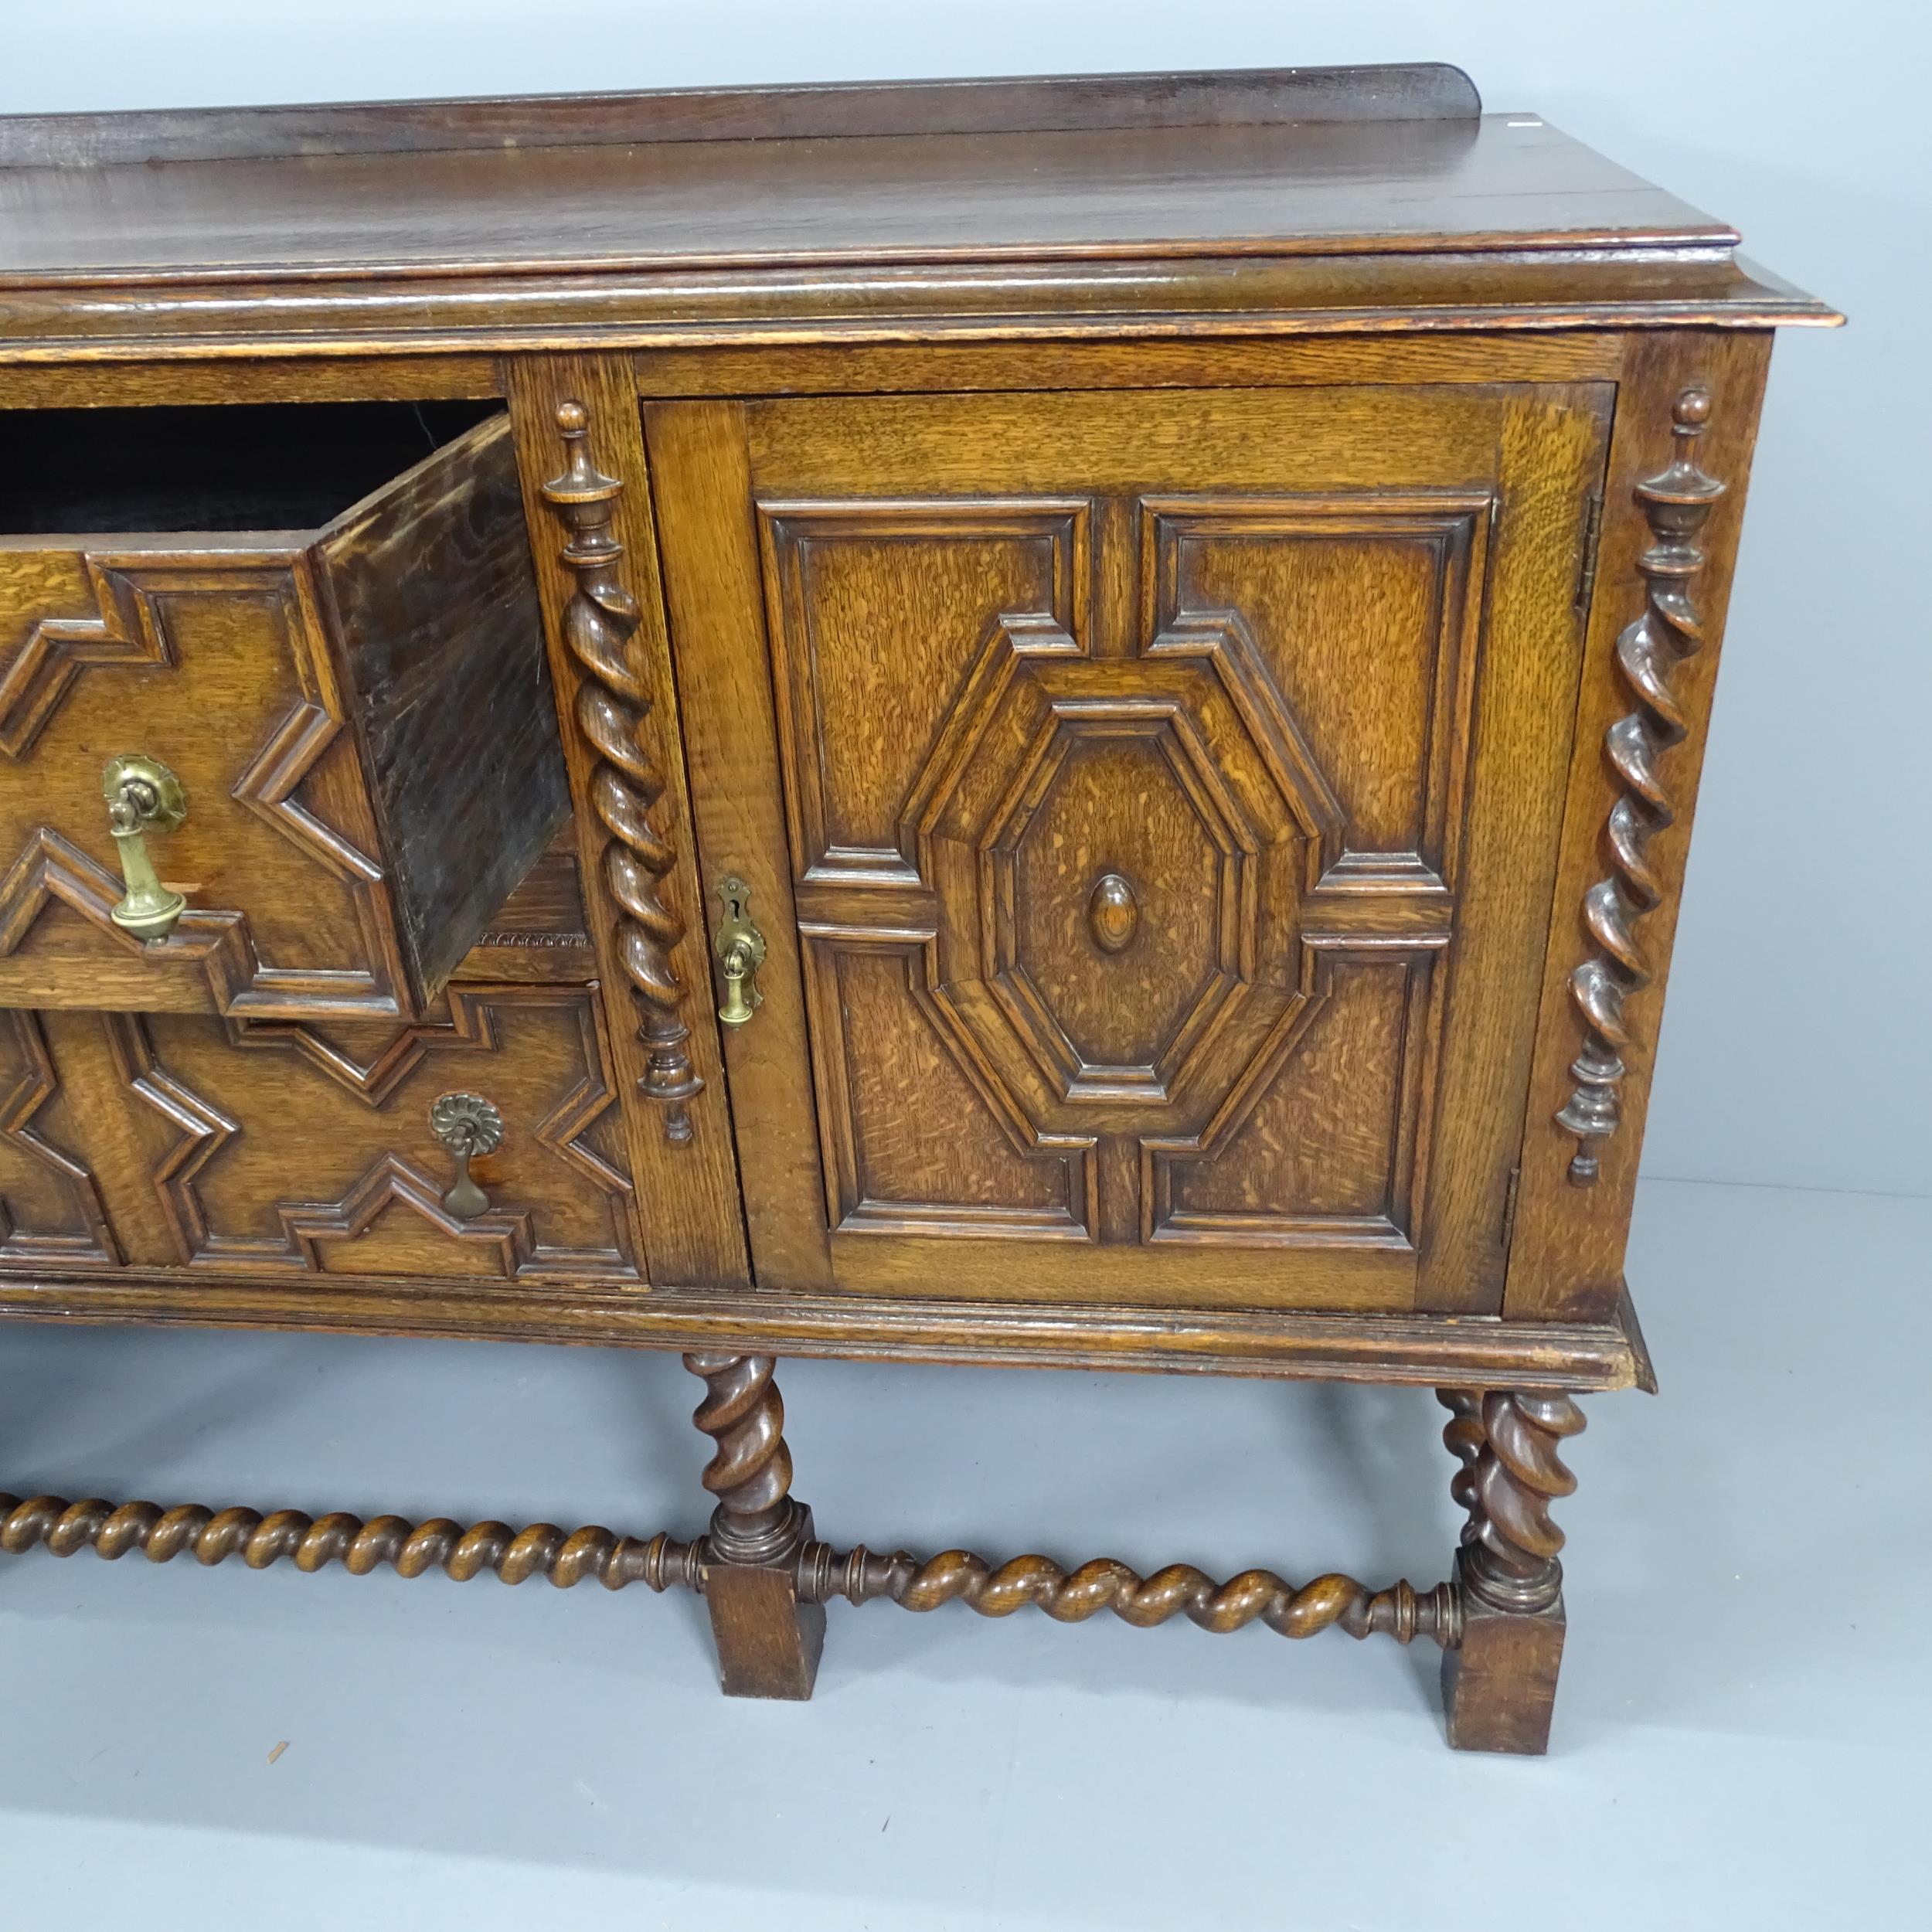 An early 20th century oak Jacobean style barley-twist sideboard with applied carved decoration. - Image 2 of 2